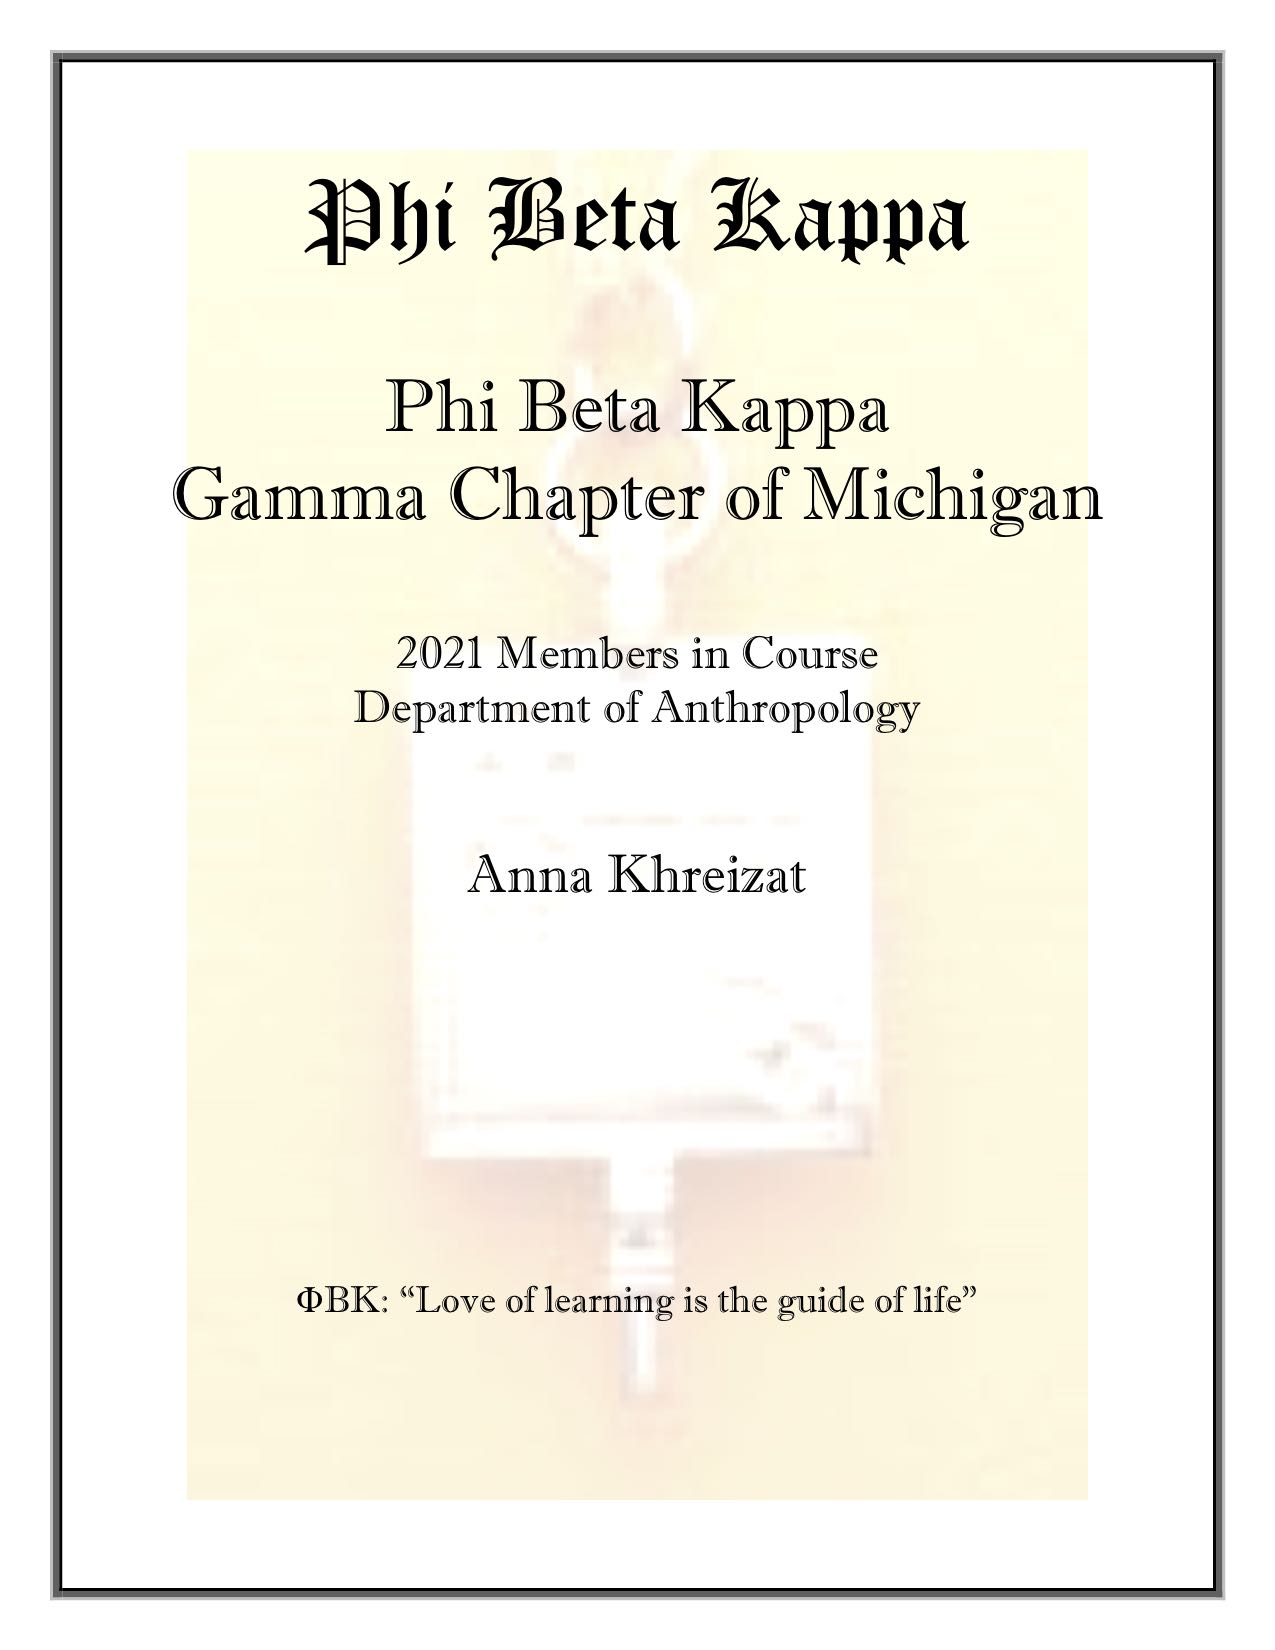 Phi Beta Kappa Phi Beta Kapa gamma Chapter of Michigan. 2021 members in course Department of Anthropology Anna Khreizat love of learning is the guide of life